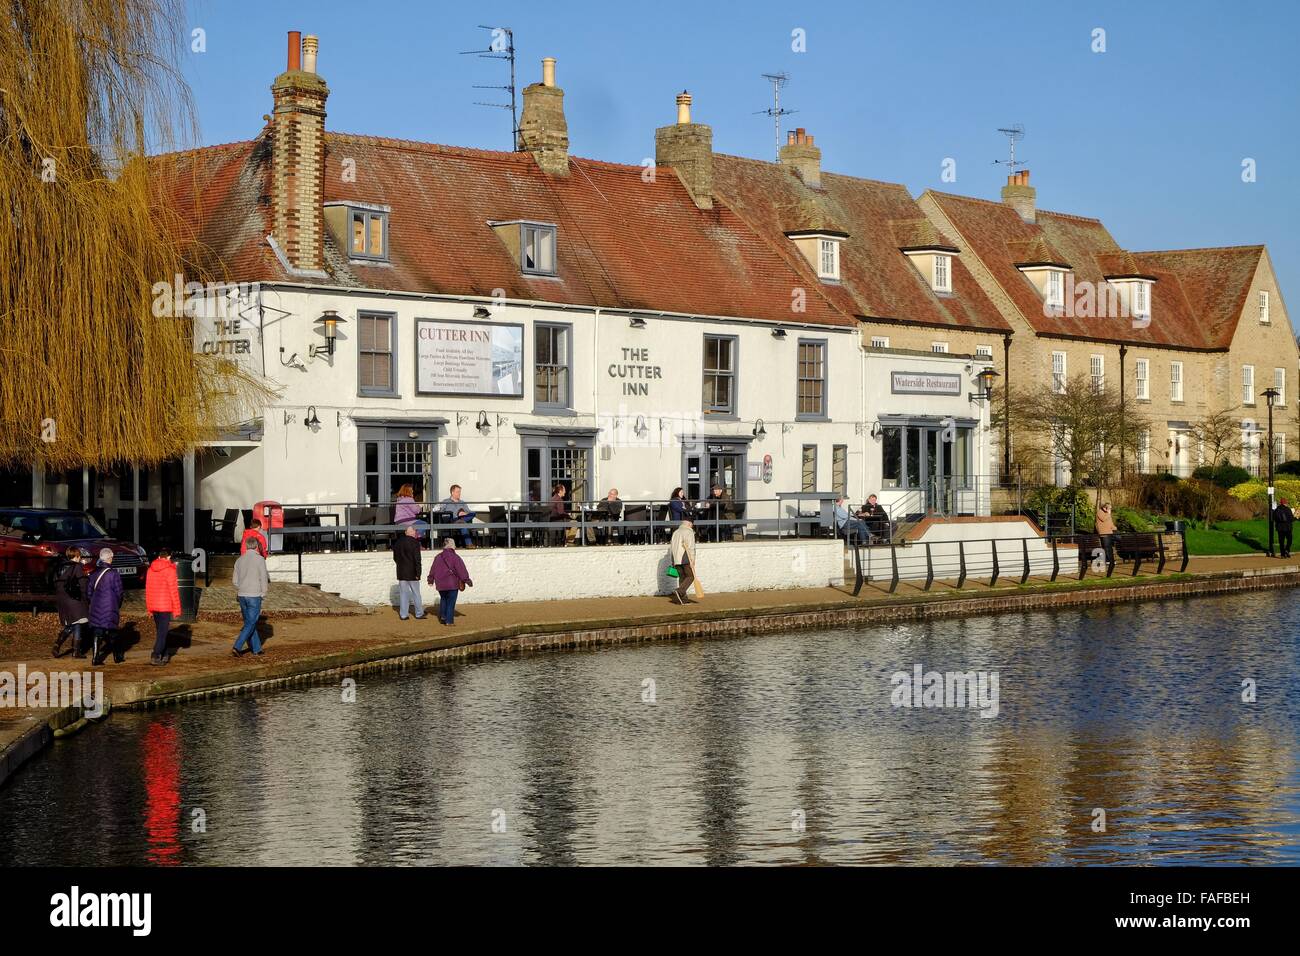 Ely, Cambridgeshire, UK.  29 Dec 2015.   Sunshine and a clear blue sky on the Great Ouse  river in the Cathedrl City of Ely show a tranquil scene in marked contrast to the flooding further north. Credit:  Tom Corban/Alamy Live News Stock Photo